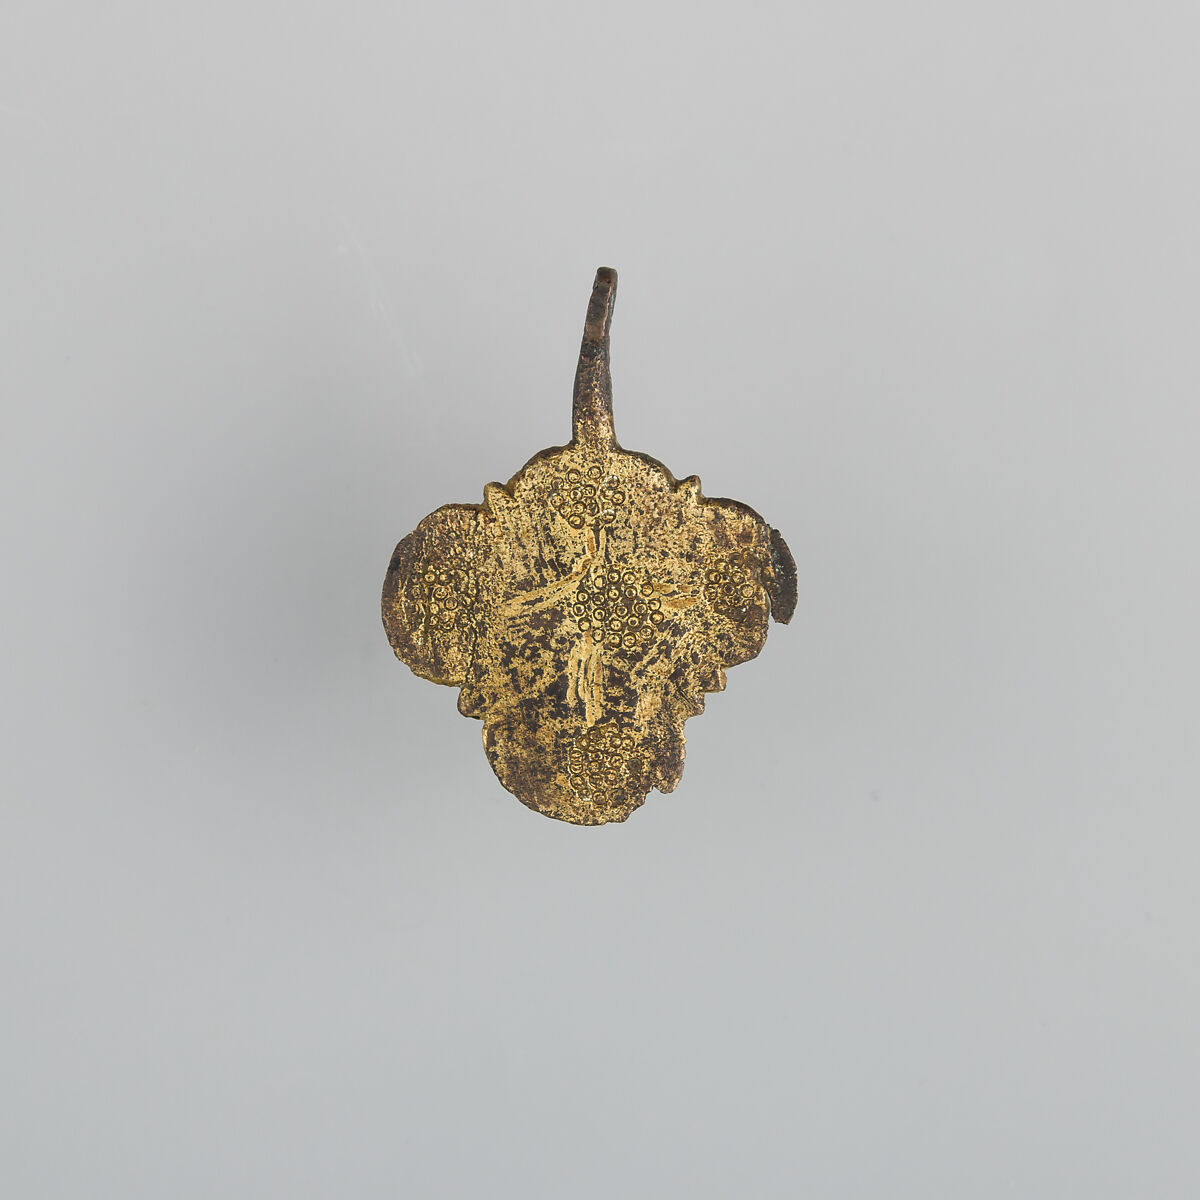 Badge or Harness Pendant, Copper, gold, possibly Spanish 